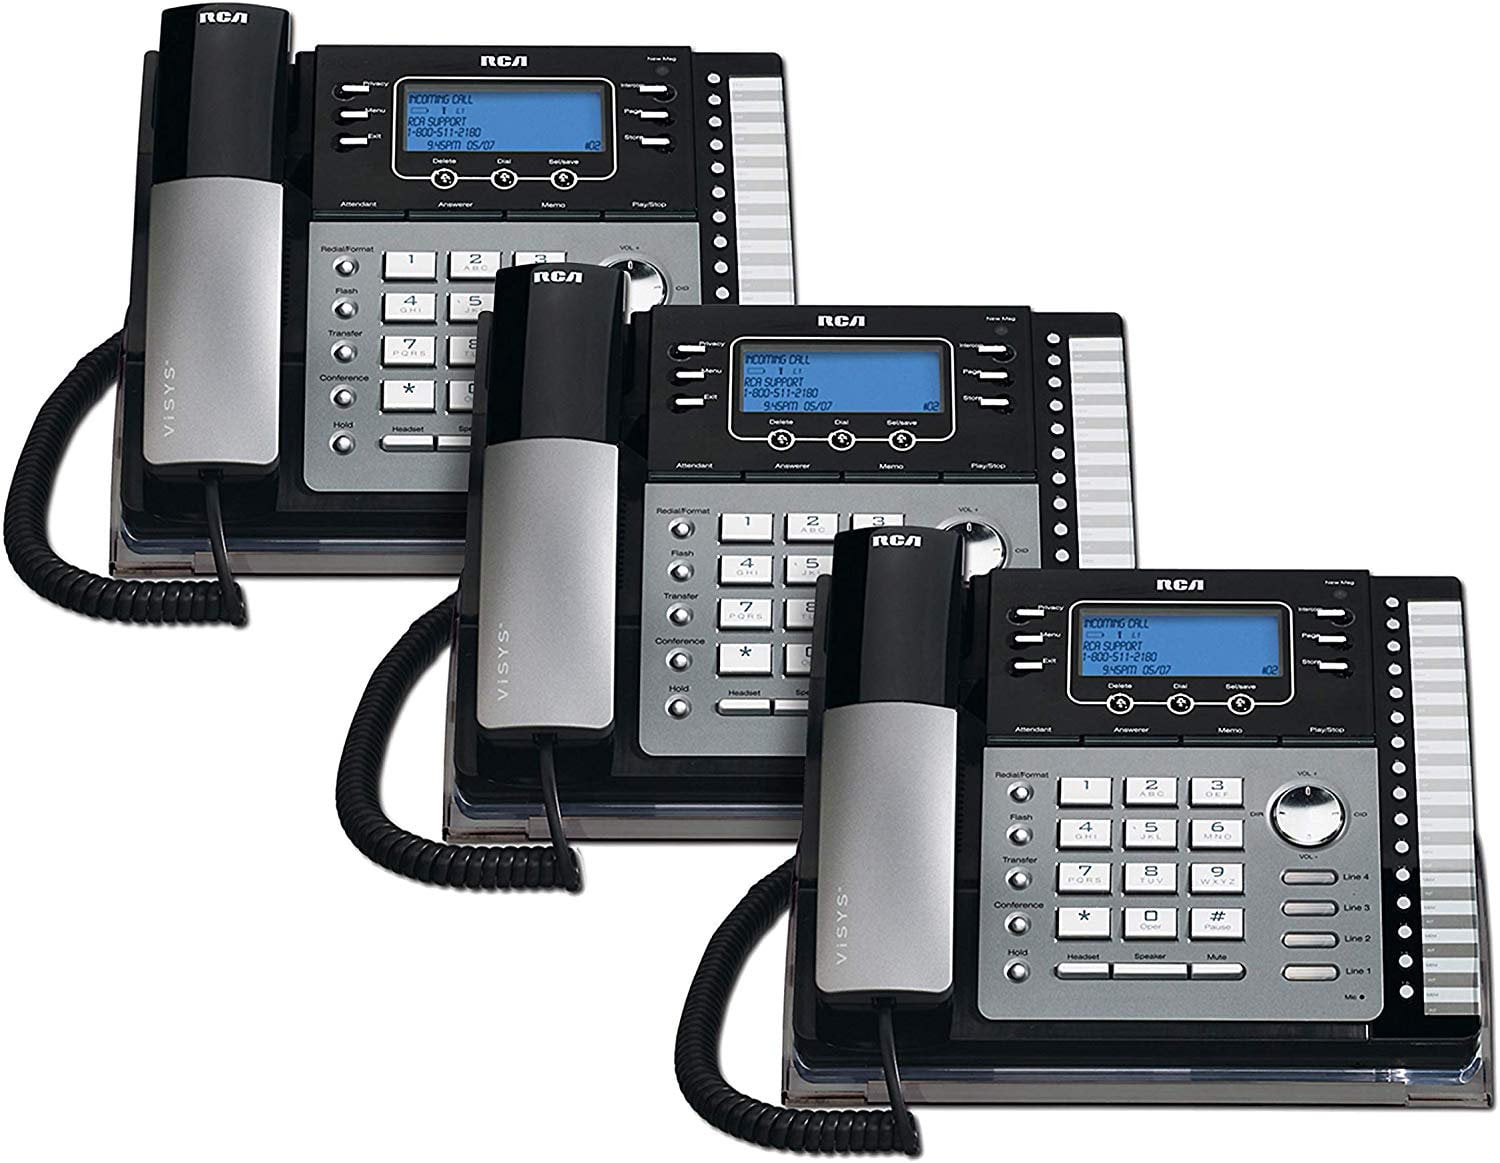 RCA ViSys 25424RE1 4-Line Expandable System Speakerphone with Call Waiting/Caller ID/Intercom 